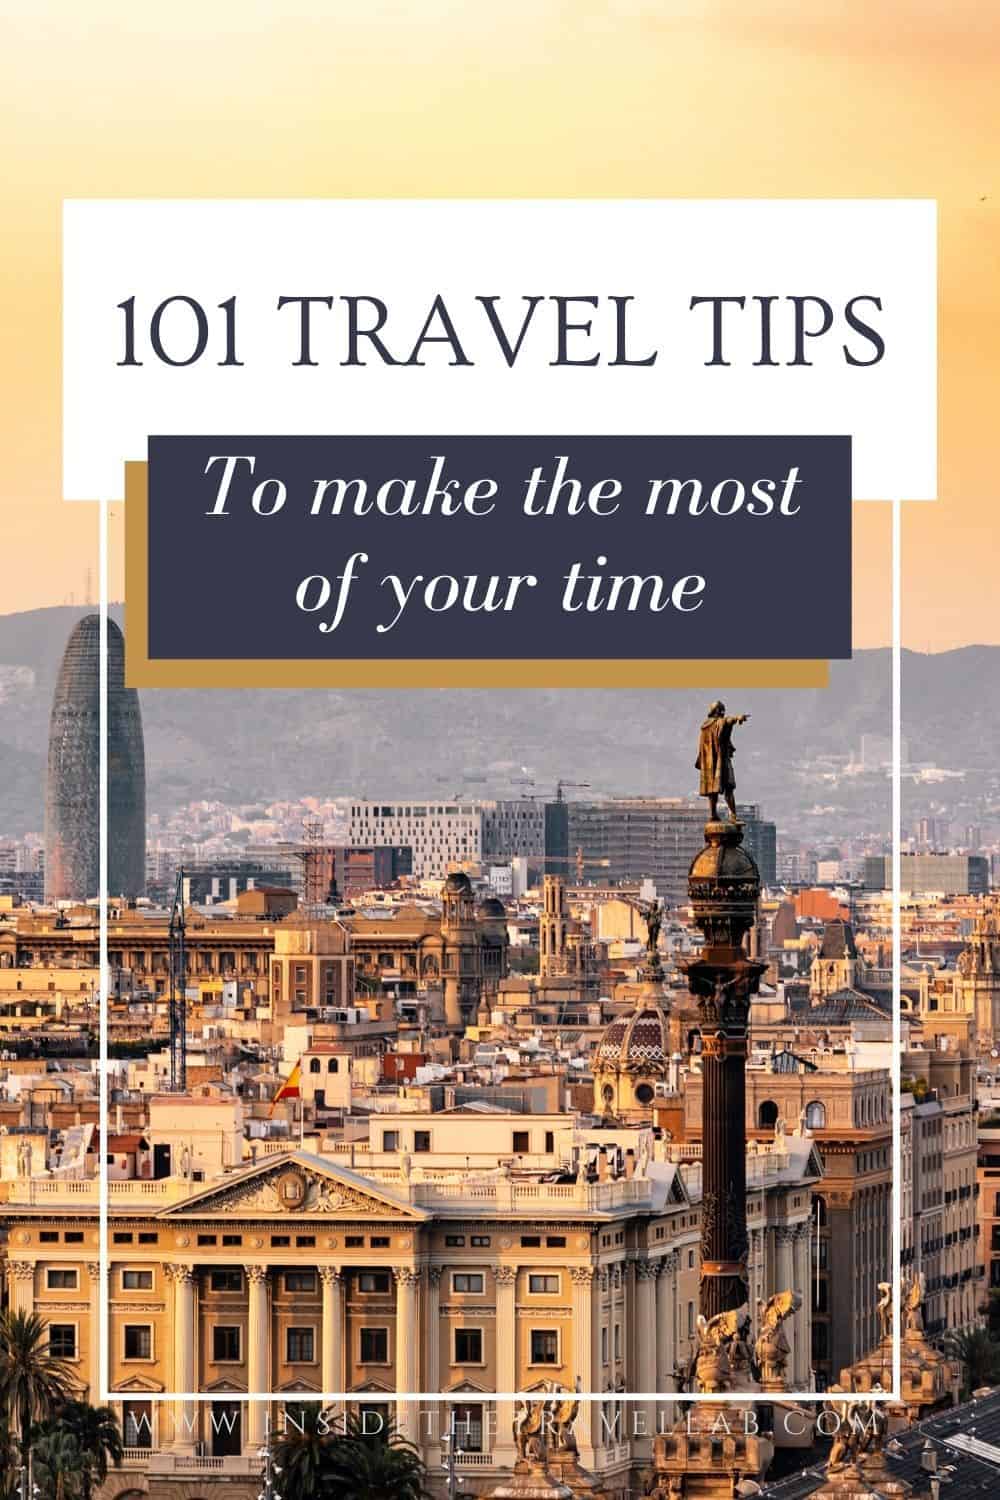 101 Travel Tips Cover